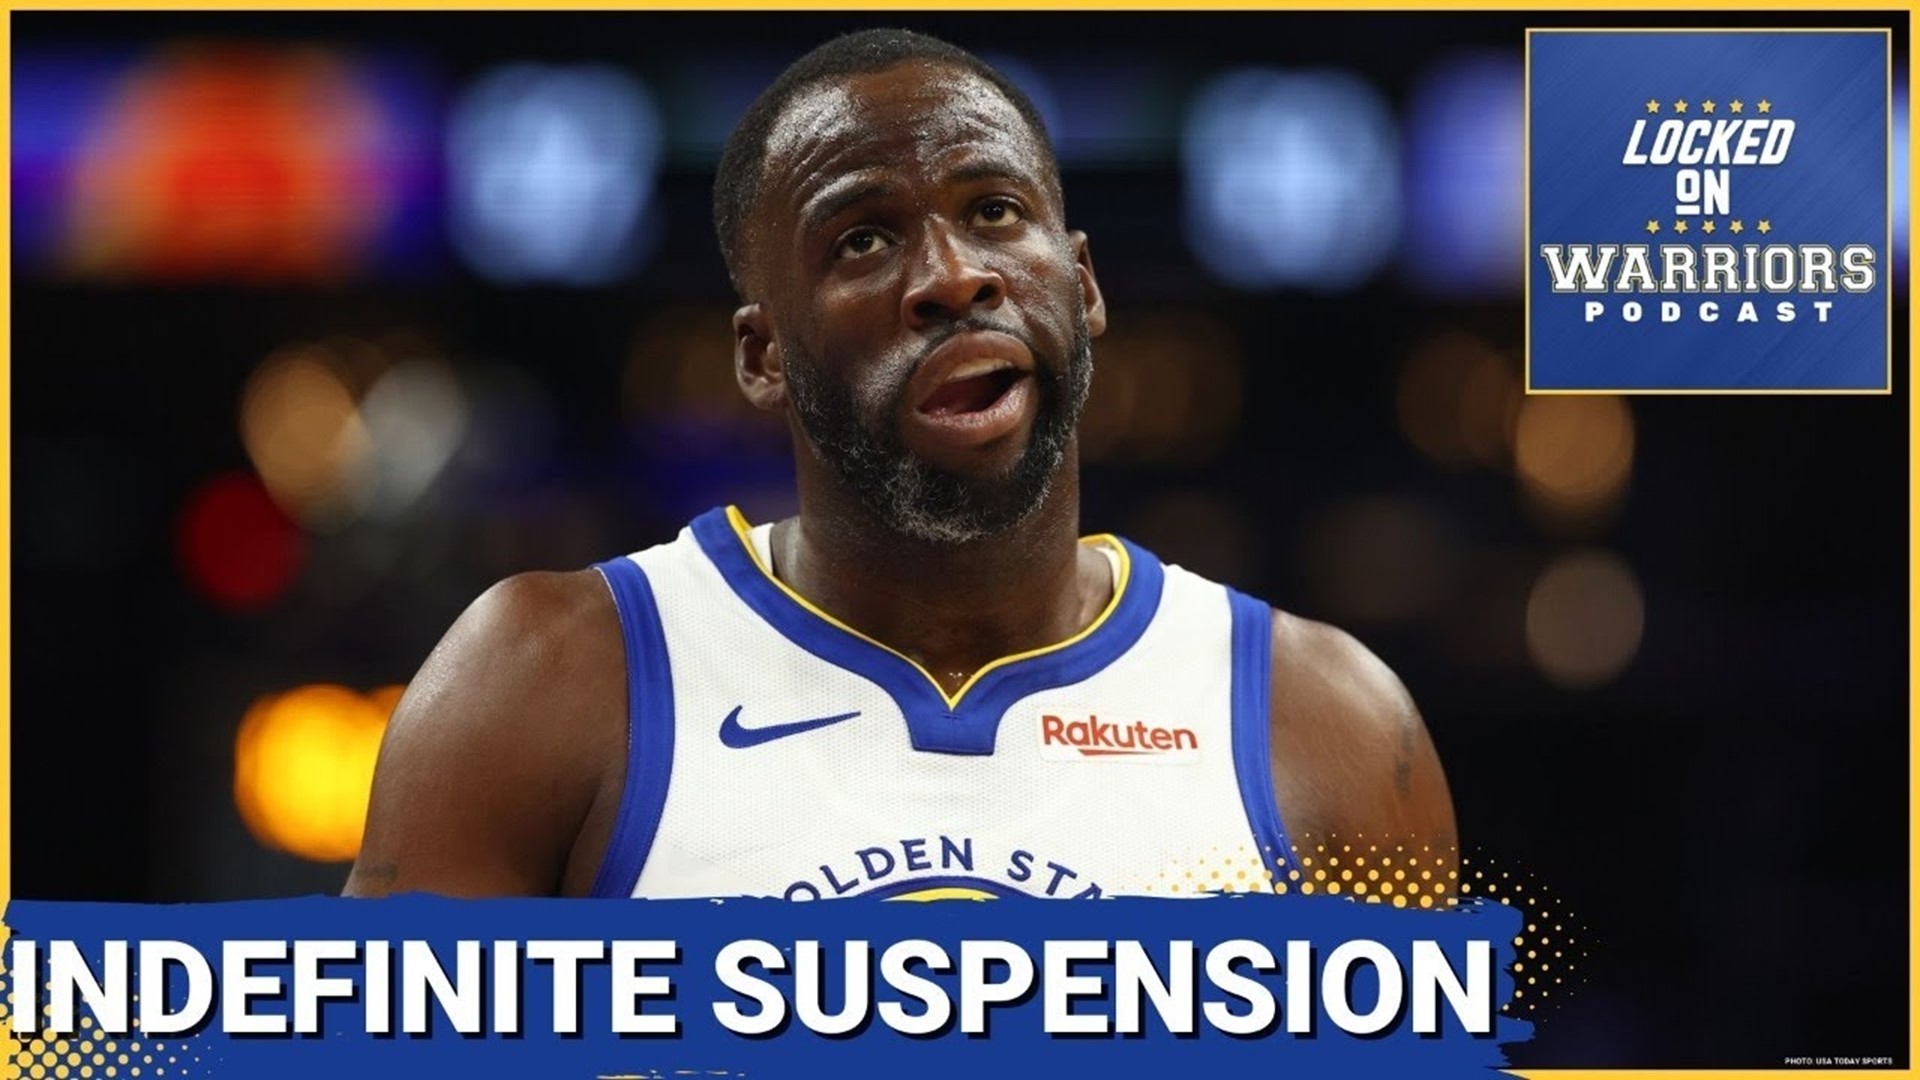 Cyrus Saatsaz went solo for a live midweek show to discuss the breaking news that Draymond Green has been suspended indefinitely.